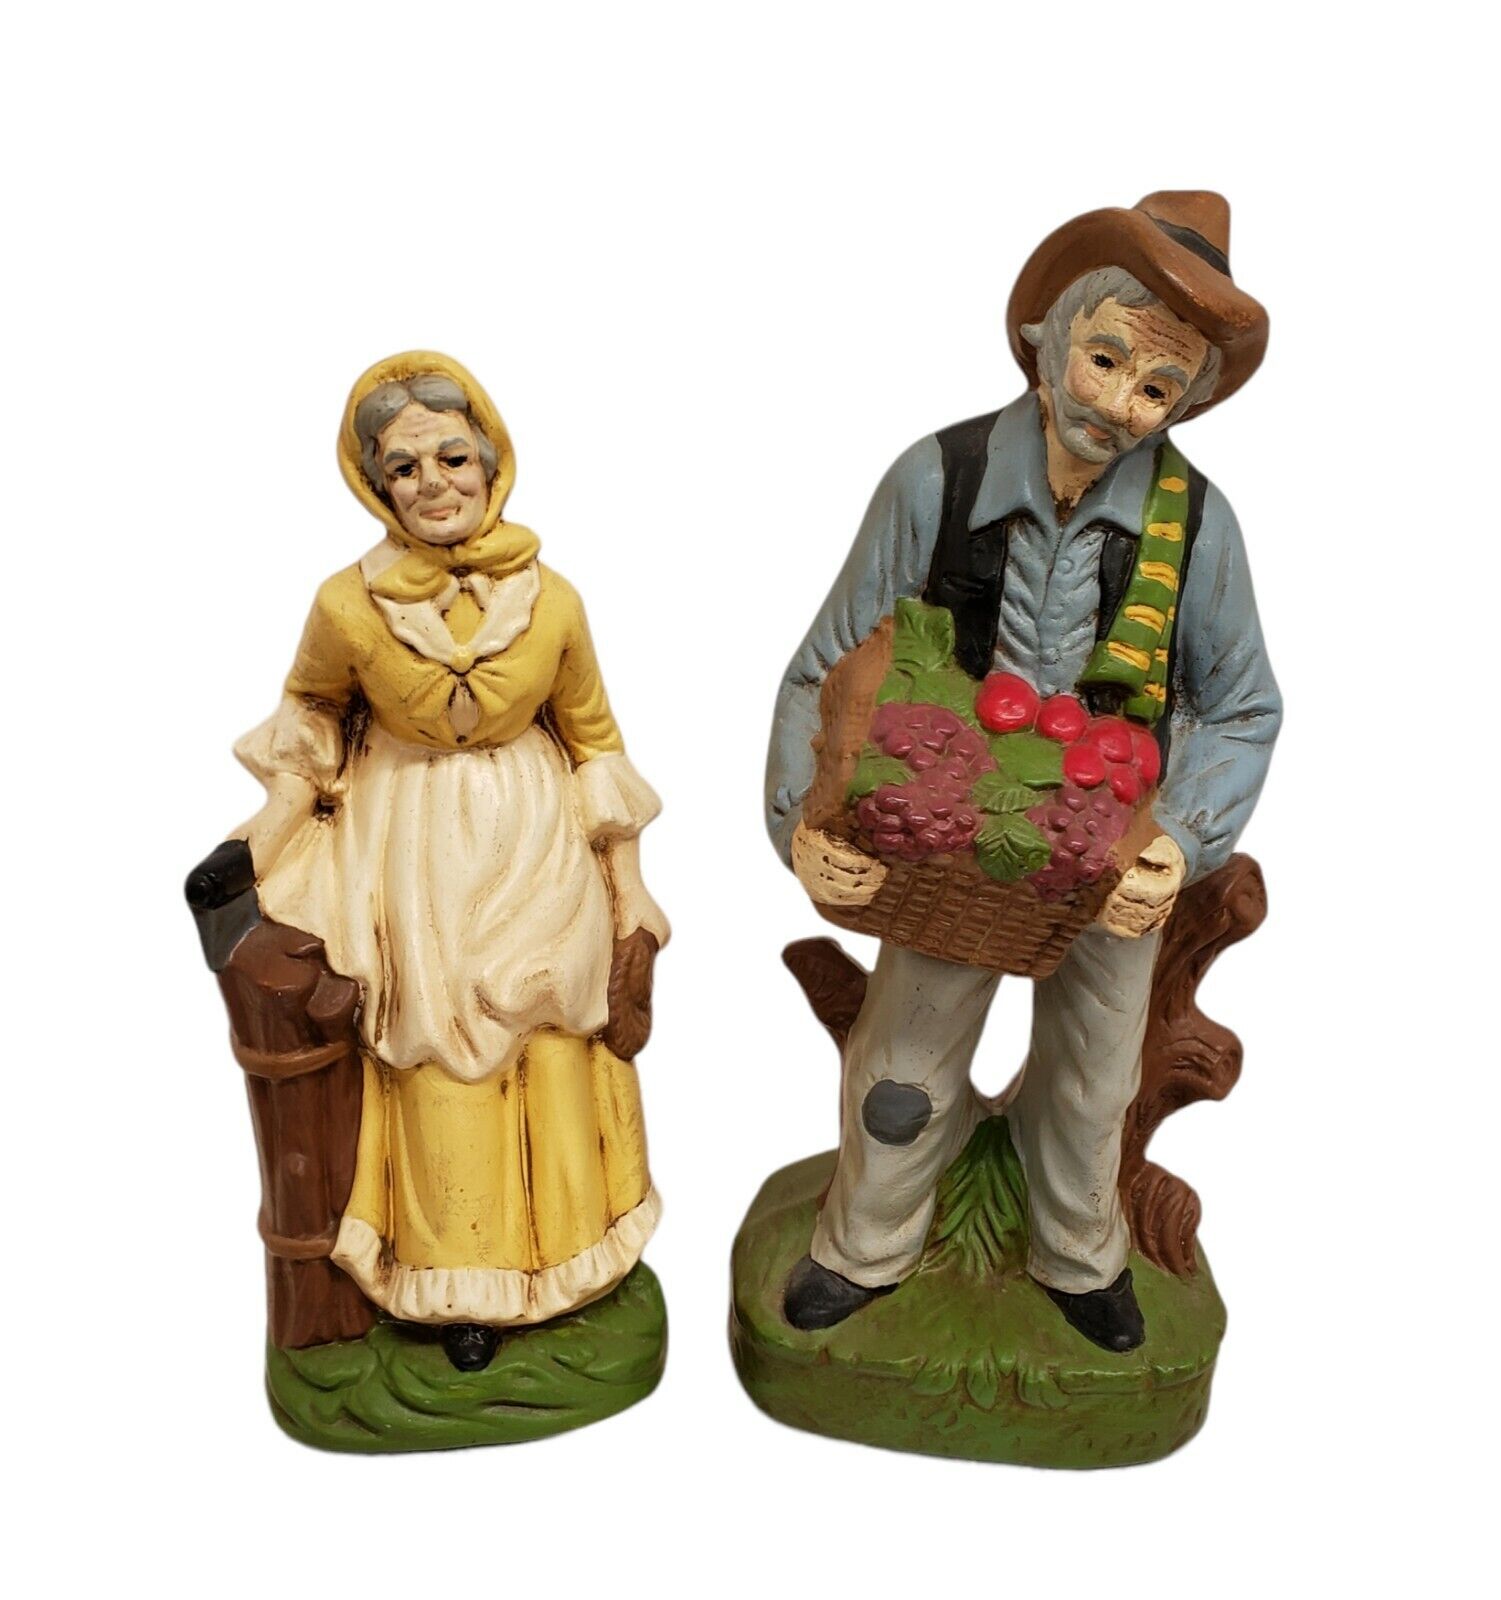 Vtg Farmers Ceramic Figurines Old Man Woman Couple Set Country Apples Grapes